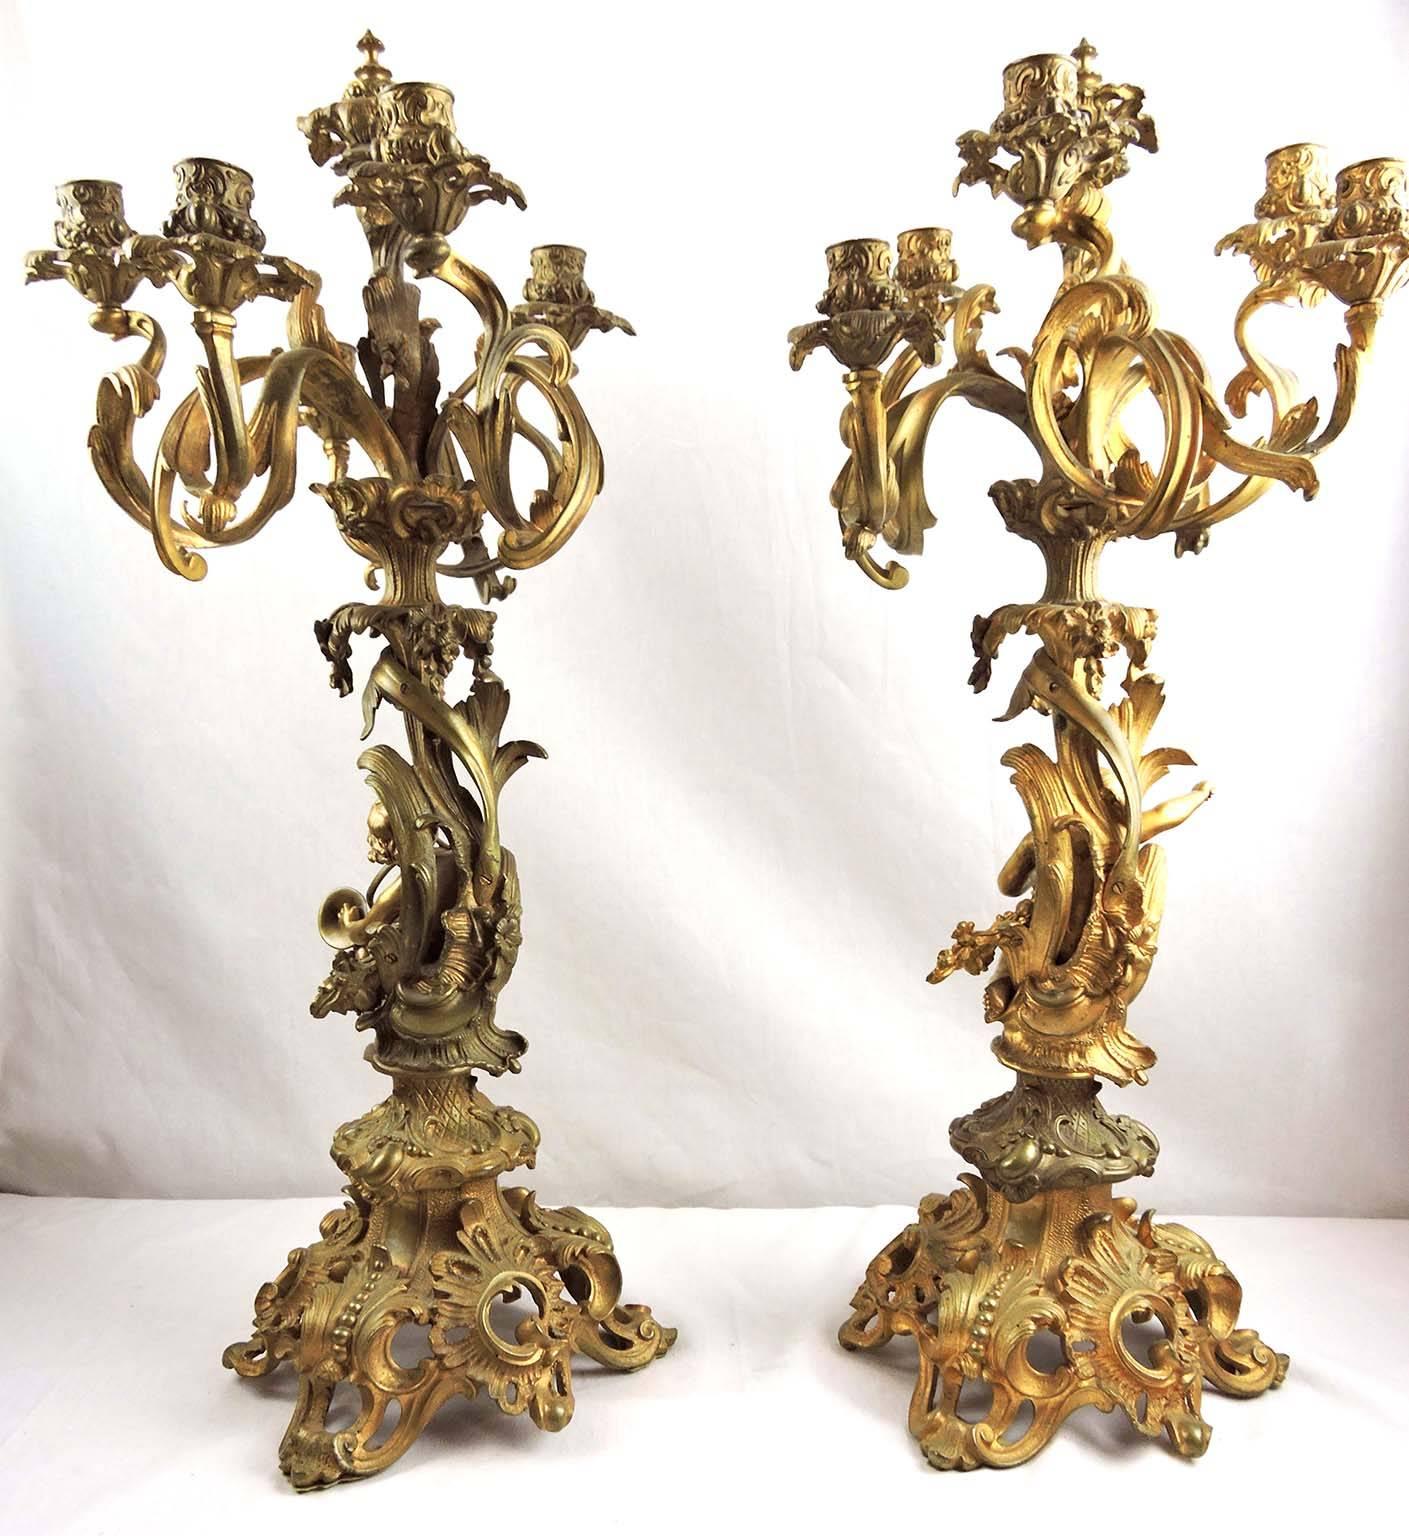 Pair of Large 19th Century Gilt Bronze-Mounted Six-Arm Figural Rococo Candelabra For Sale 2